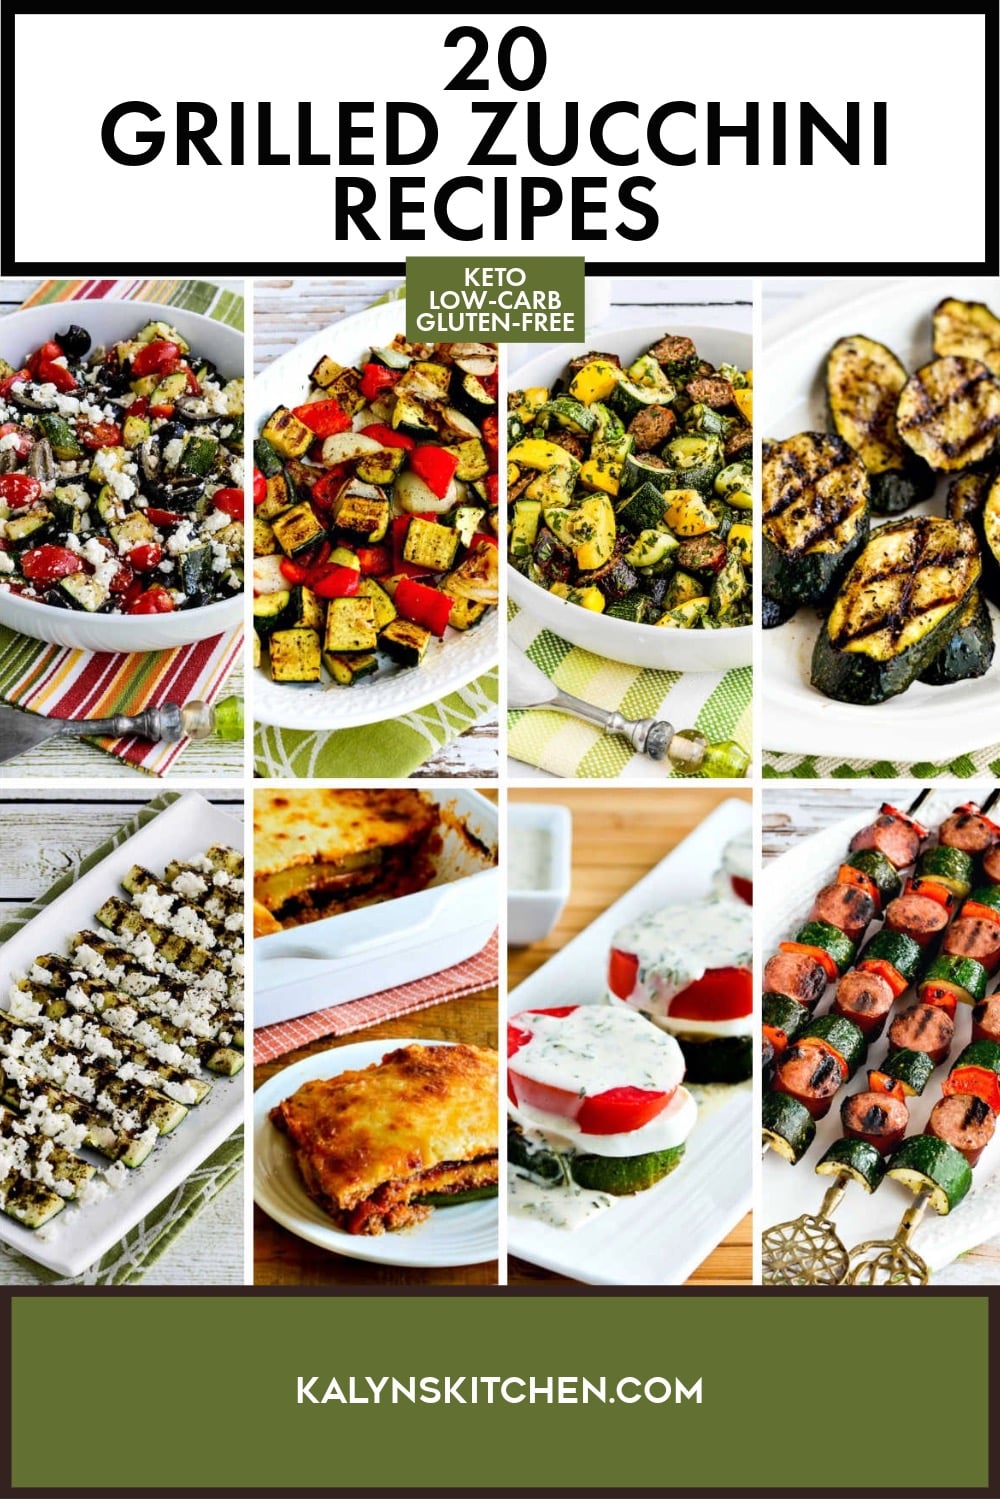 Pinterest image of 20 Grilled Zucchini Recipes